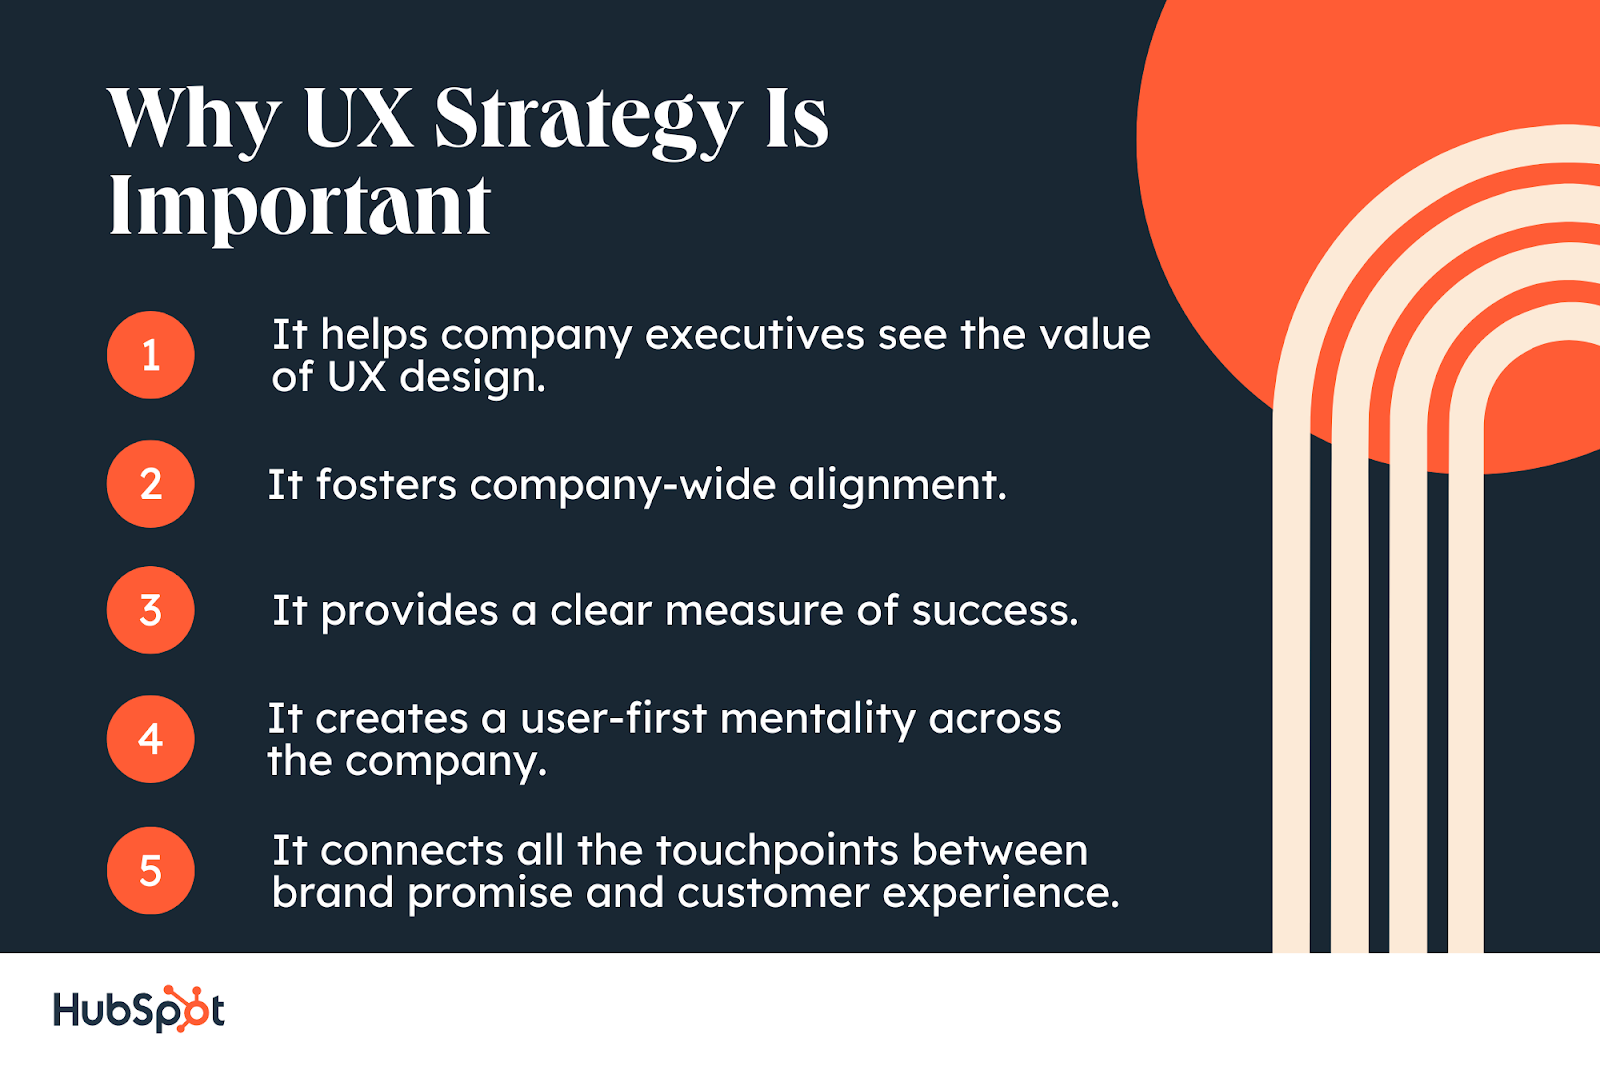 UX Strategy Is Important. It helps company executives see the value of UX design. It fosters company-wide alignment. It provides a clear measure of success. It creates a user-first mentality across the company. It connects all the touchpoints between brand promise and customer experience.